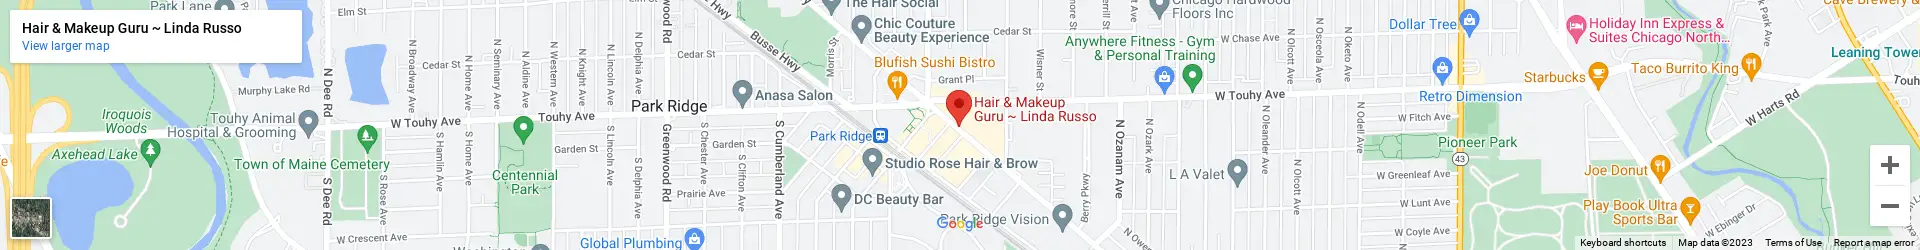 A map of the location of hair & makeup guru